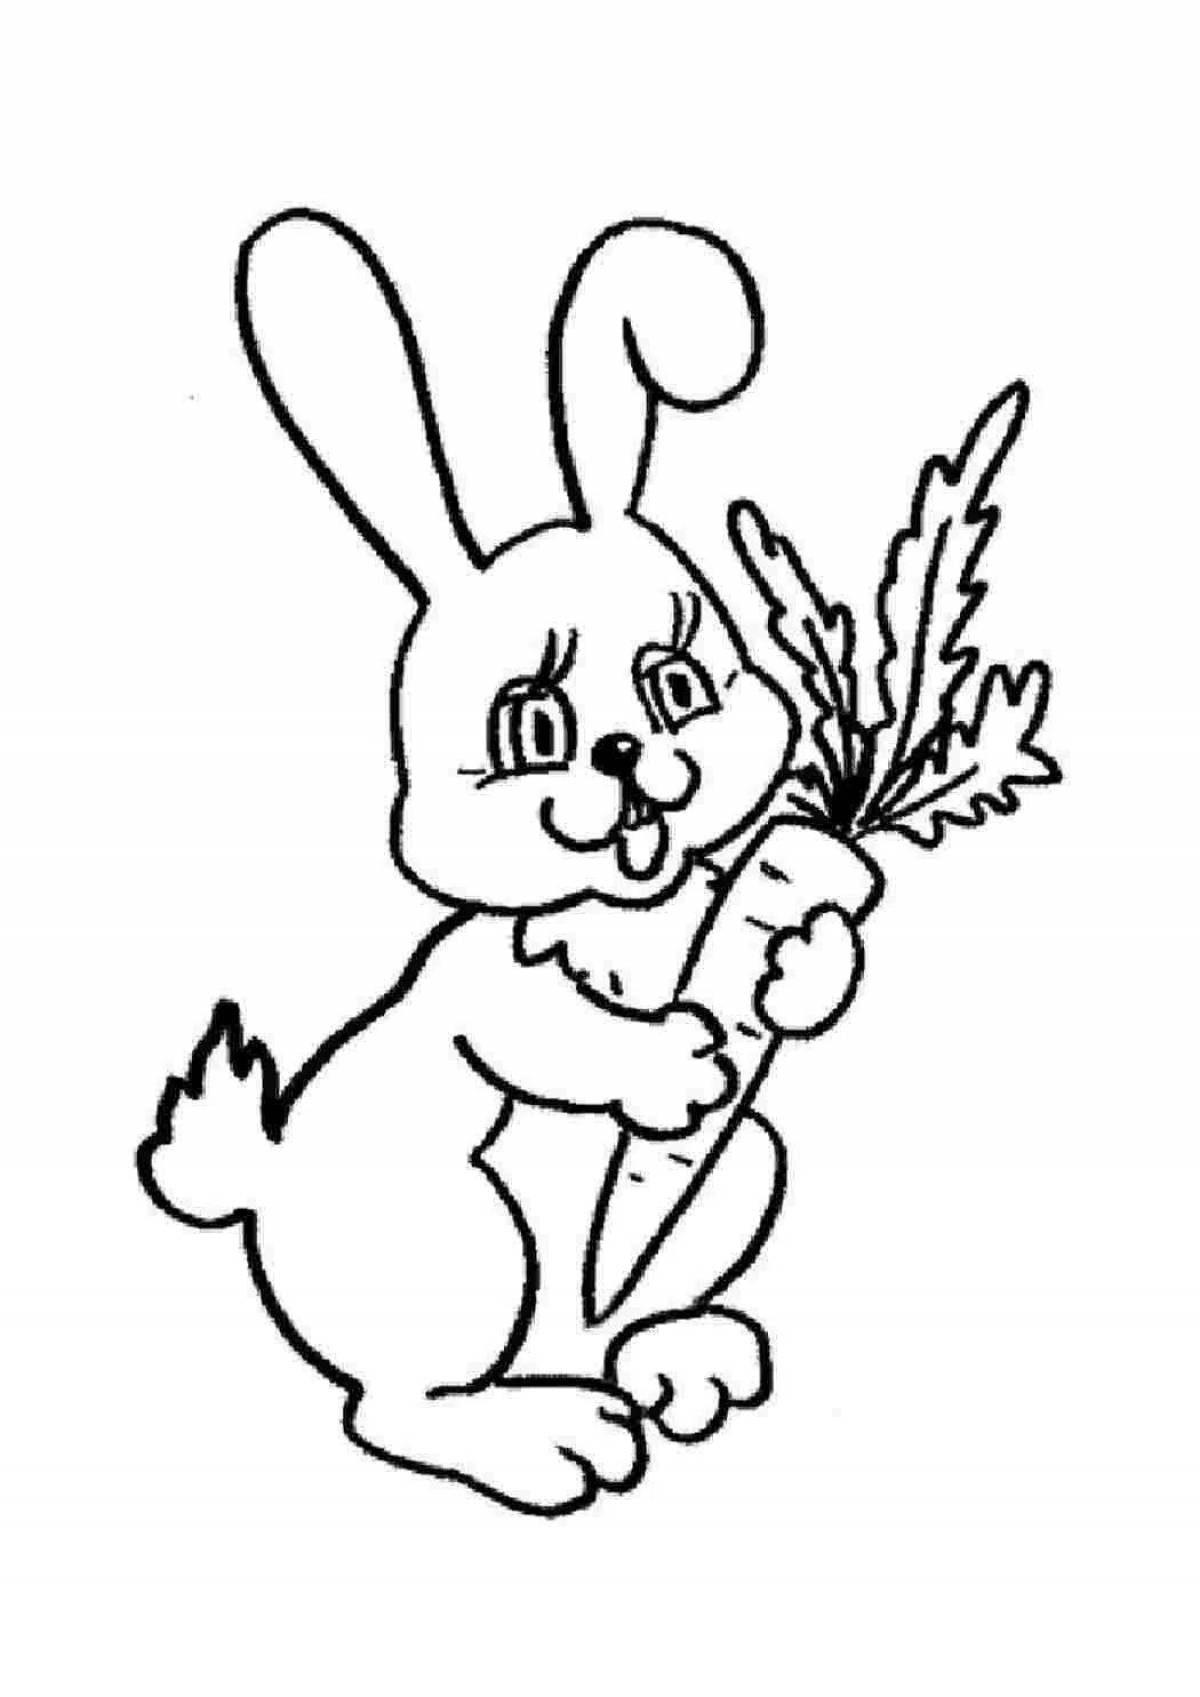 Jolly jumper with rabbit